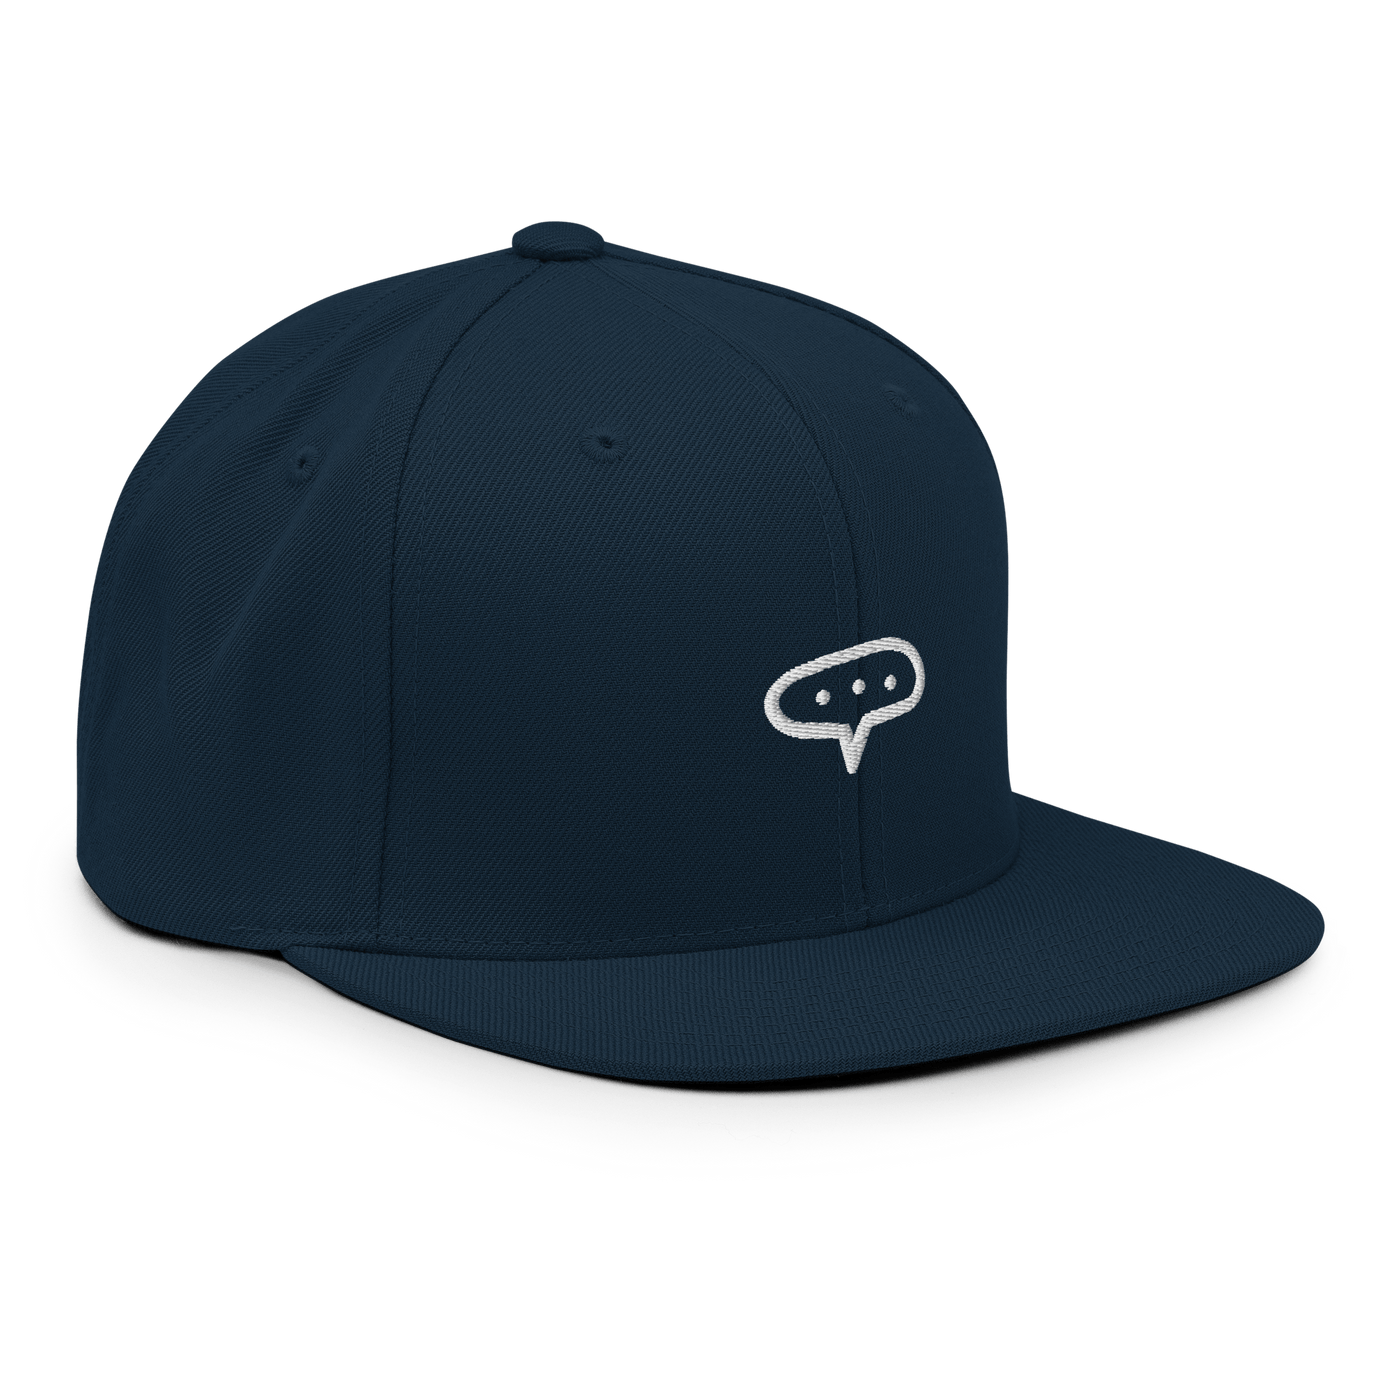 Thinking Snapback Hat - Dark Navy - - Just Another Cap Store